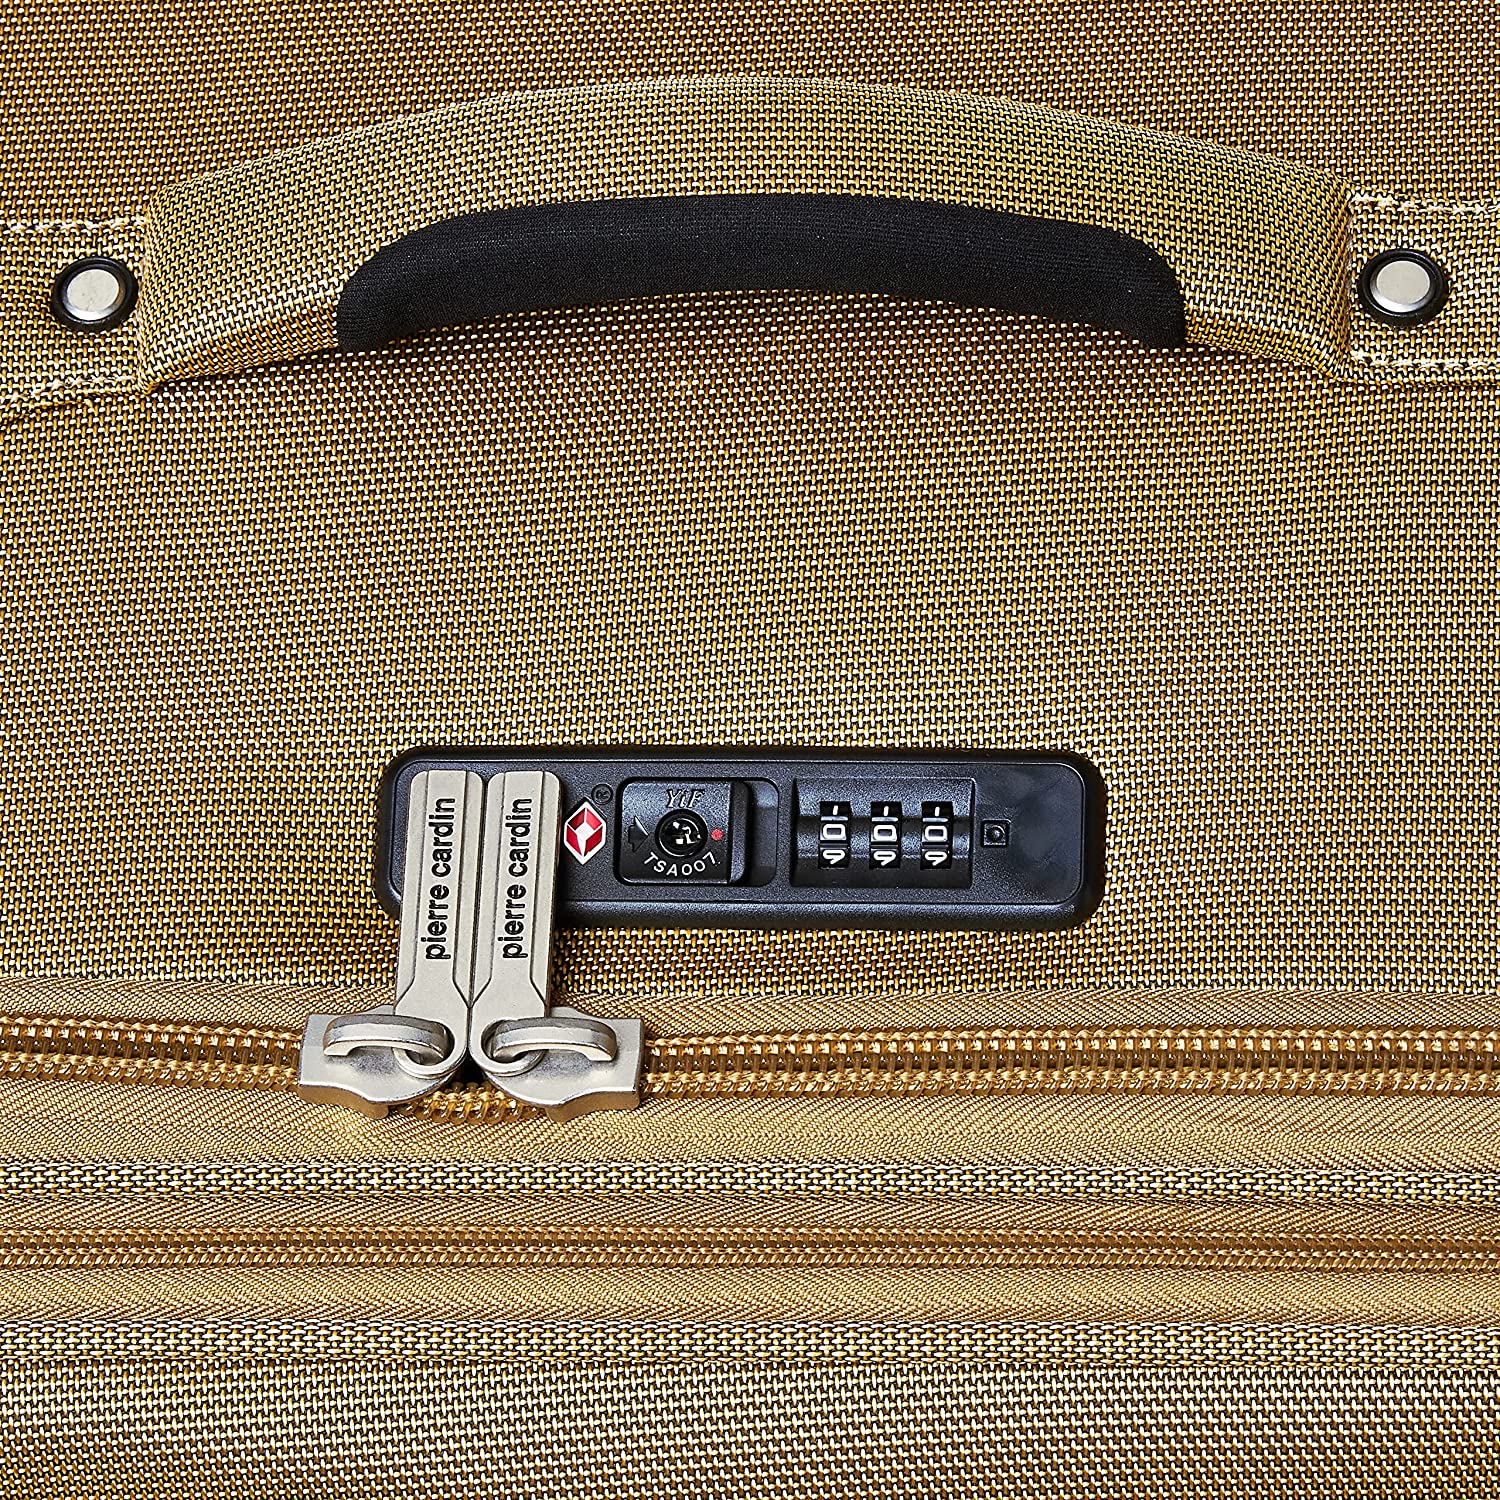 Pierre Cardin TL Softcase Trolley Check In Extra Large Gold